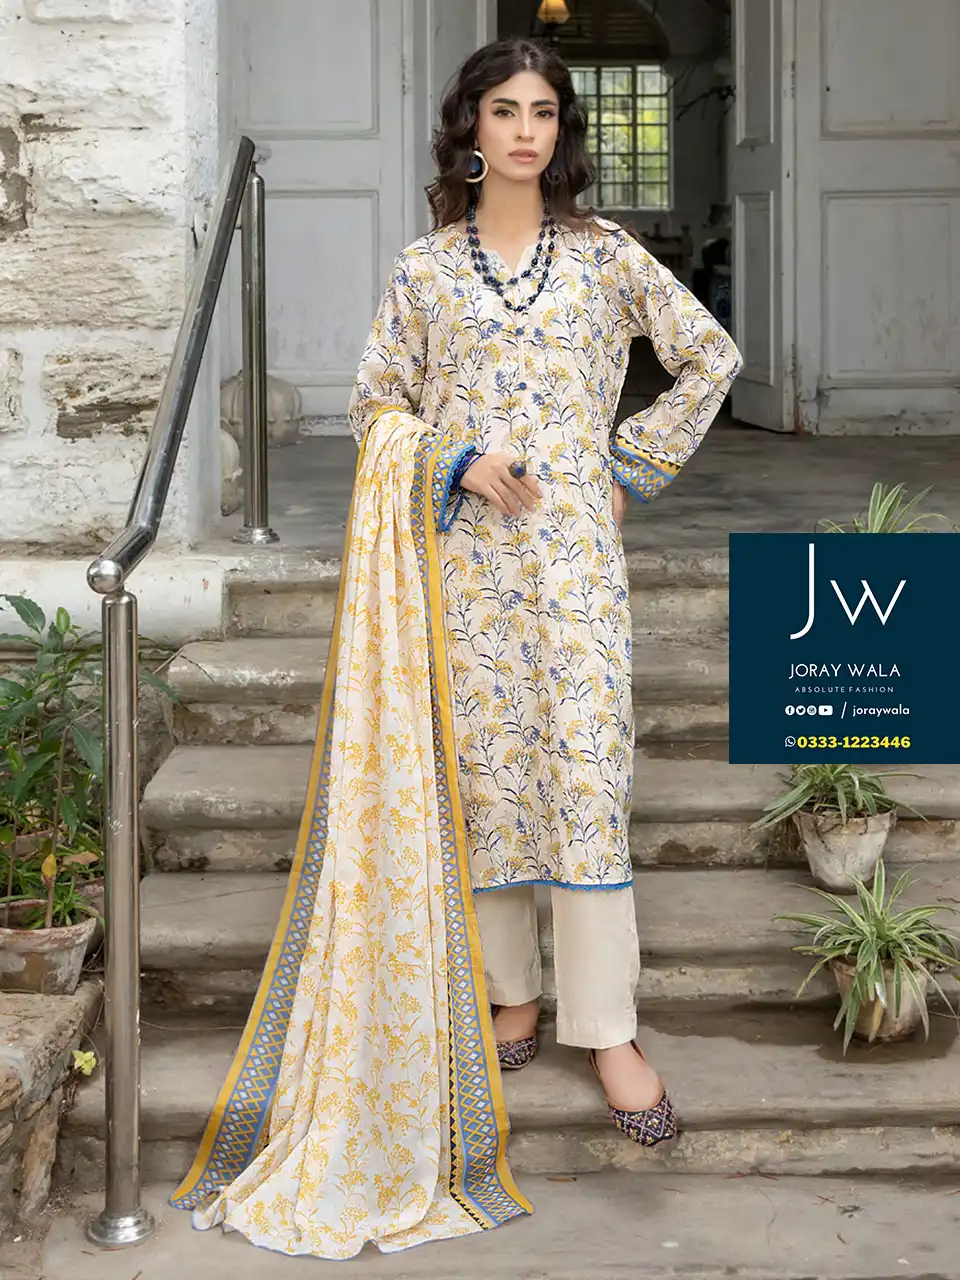 Zesh Summer Printed Lawn 2024 D3 available with free delivery at joraywala. 100% Original.